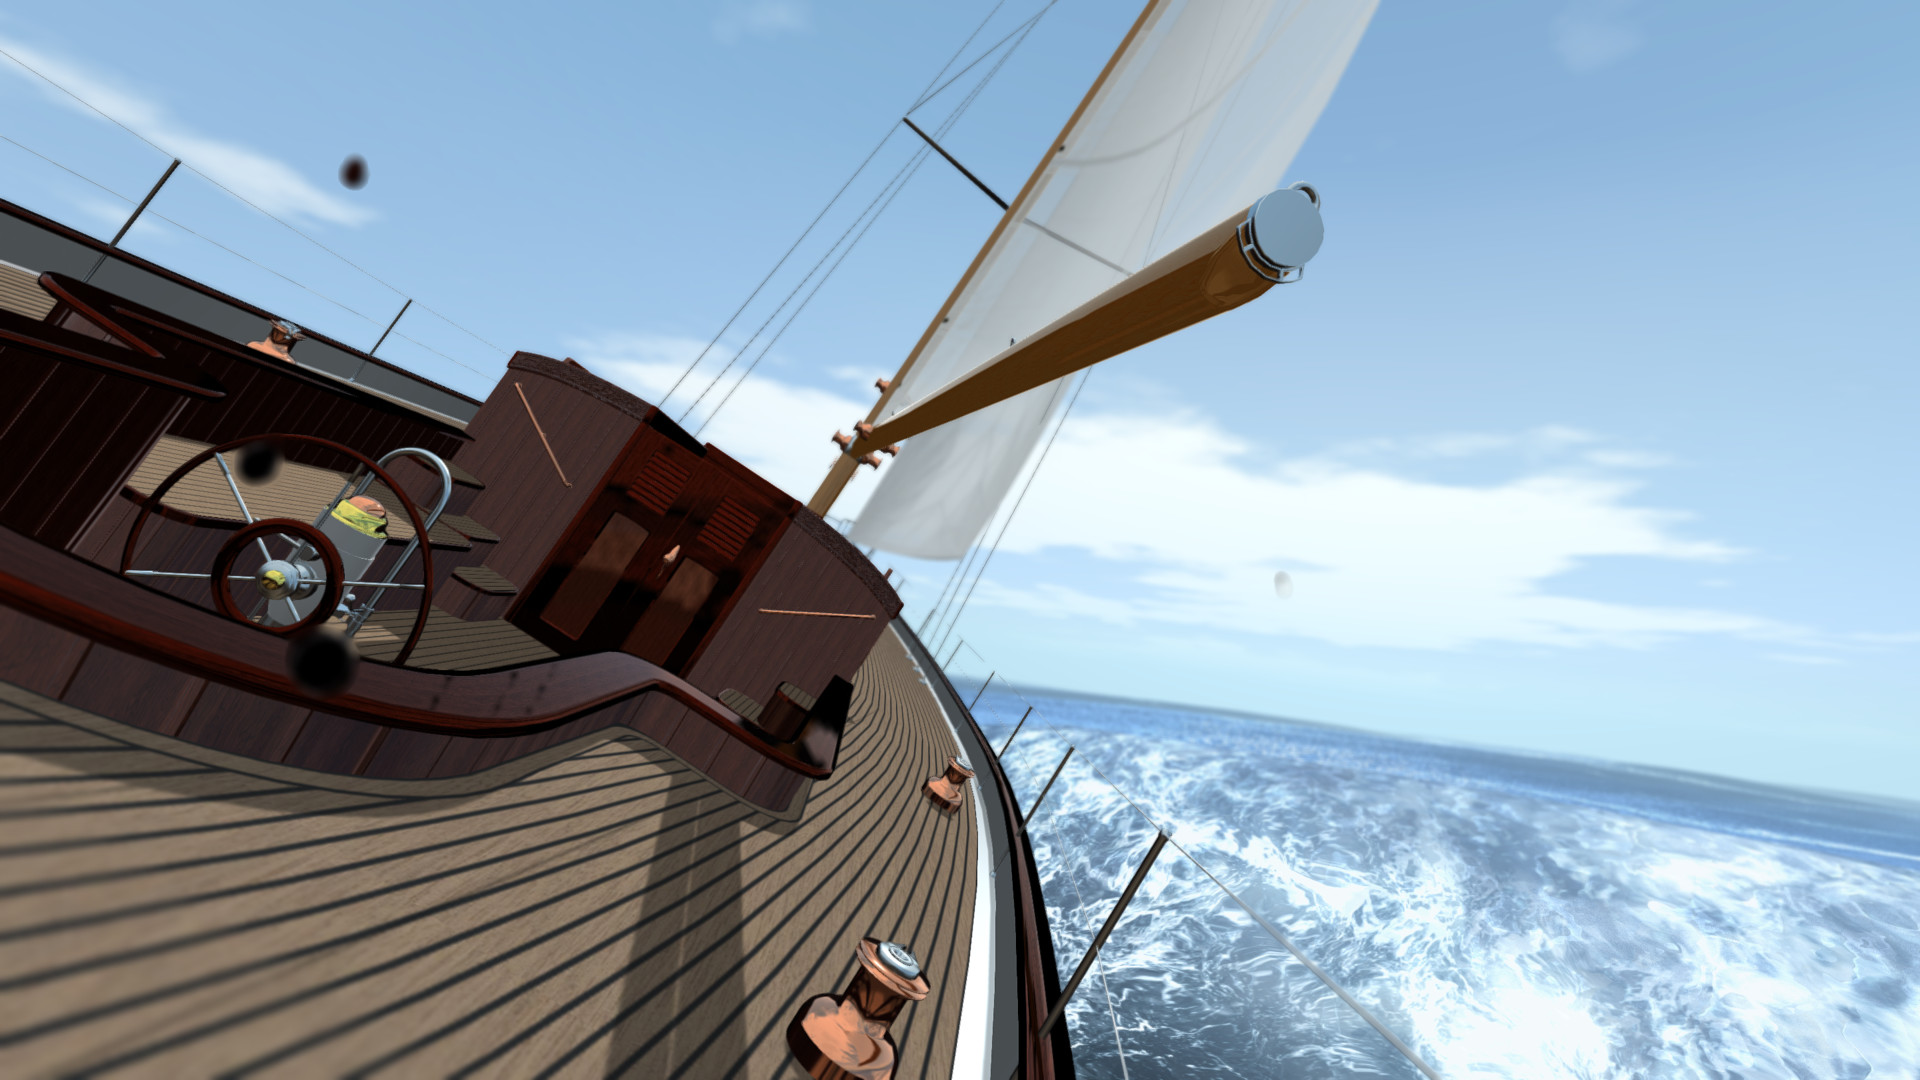 Yacht - Game for Mac, Windows (PC), Linux - WebCatalog